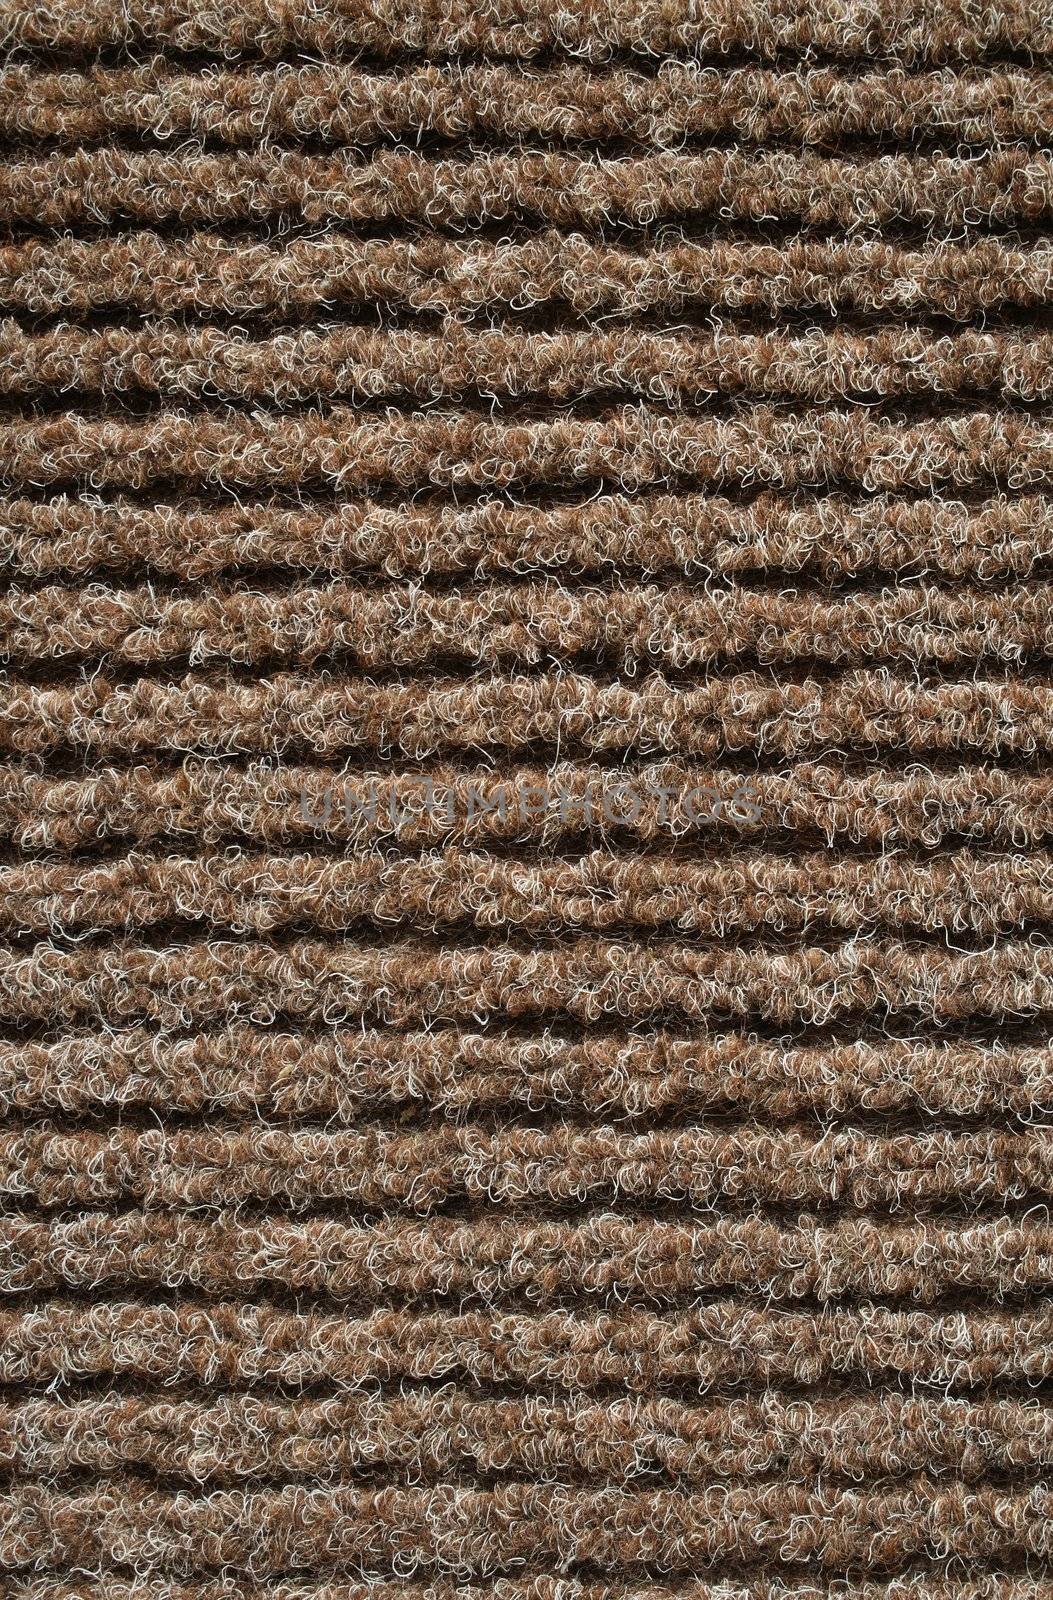 Texture of a brown striped fabric of a carpet.